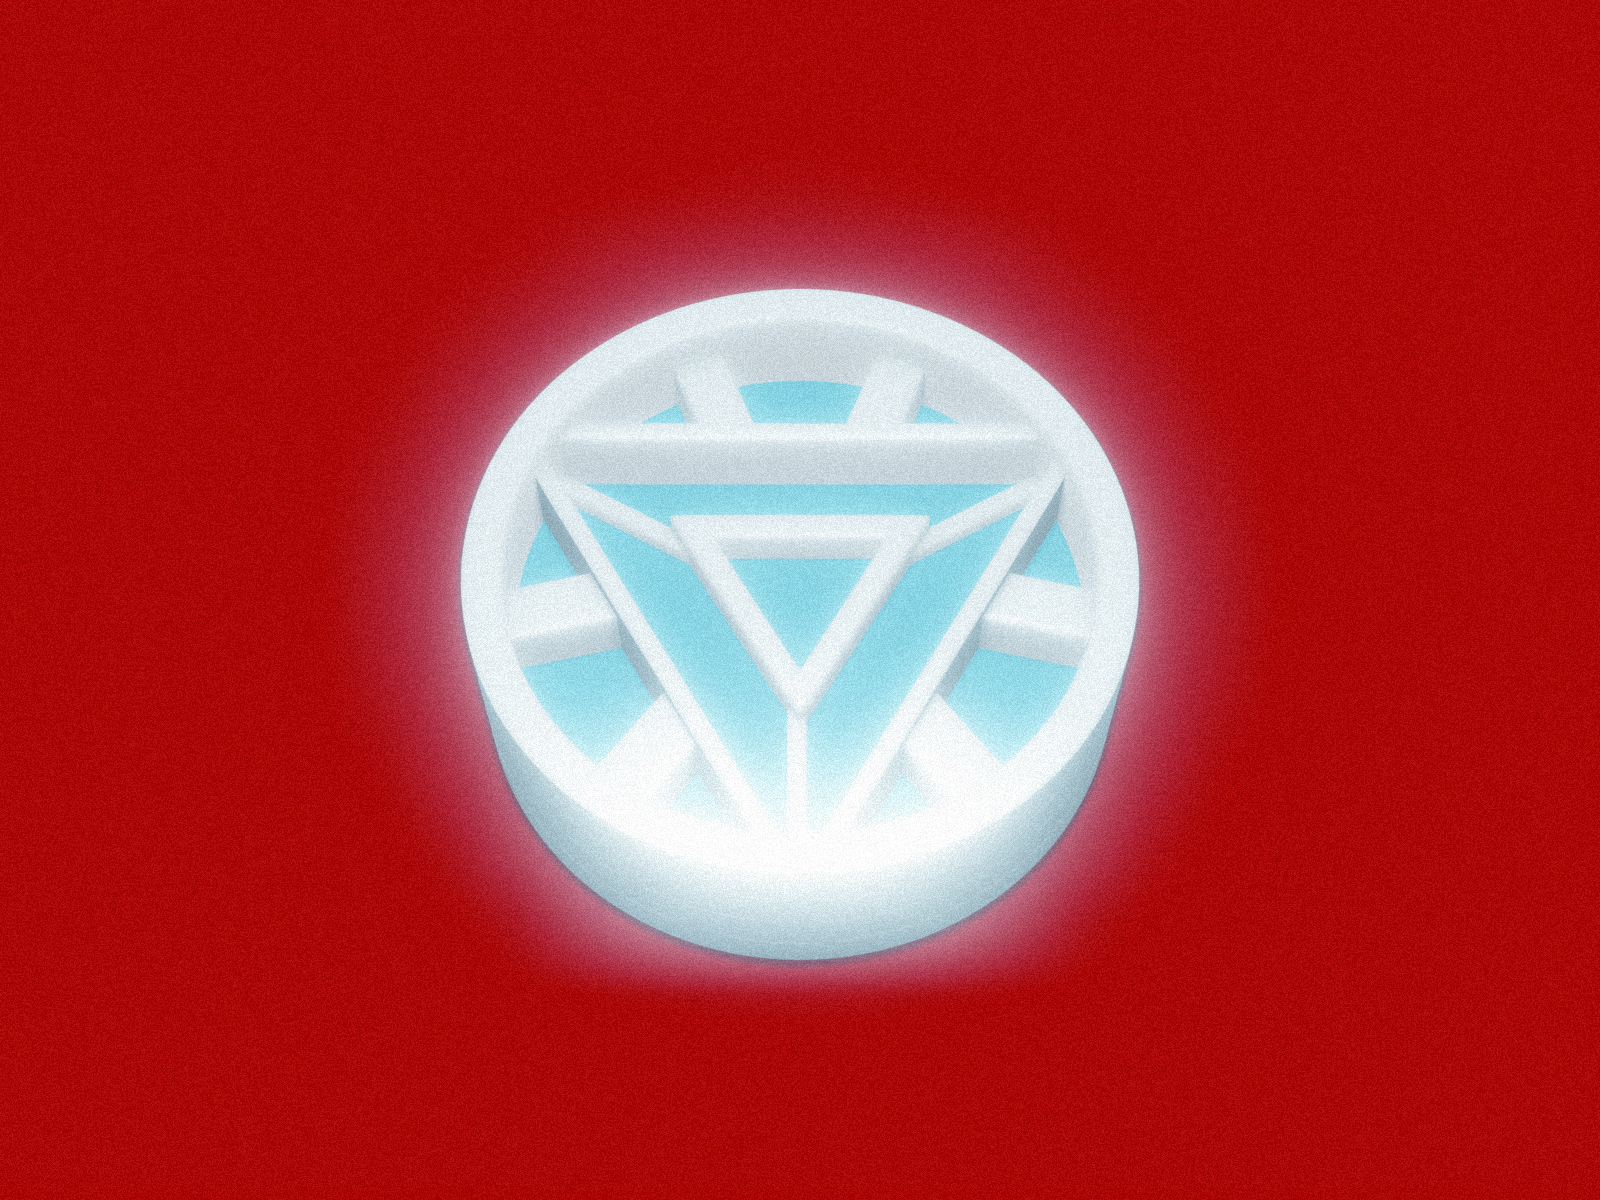 Iron Man Arc Reactor by Clef D'Souza on Dribbble